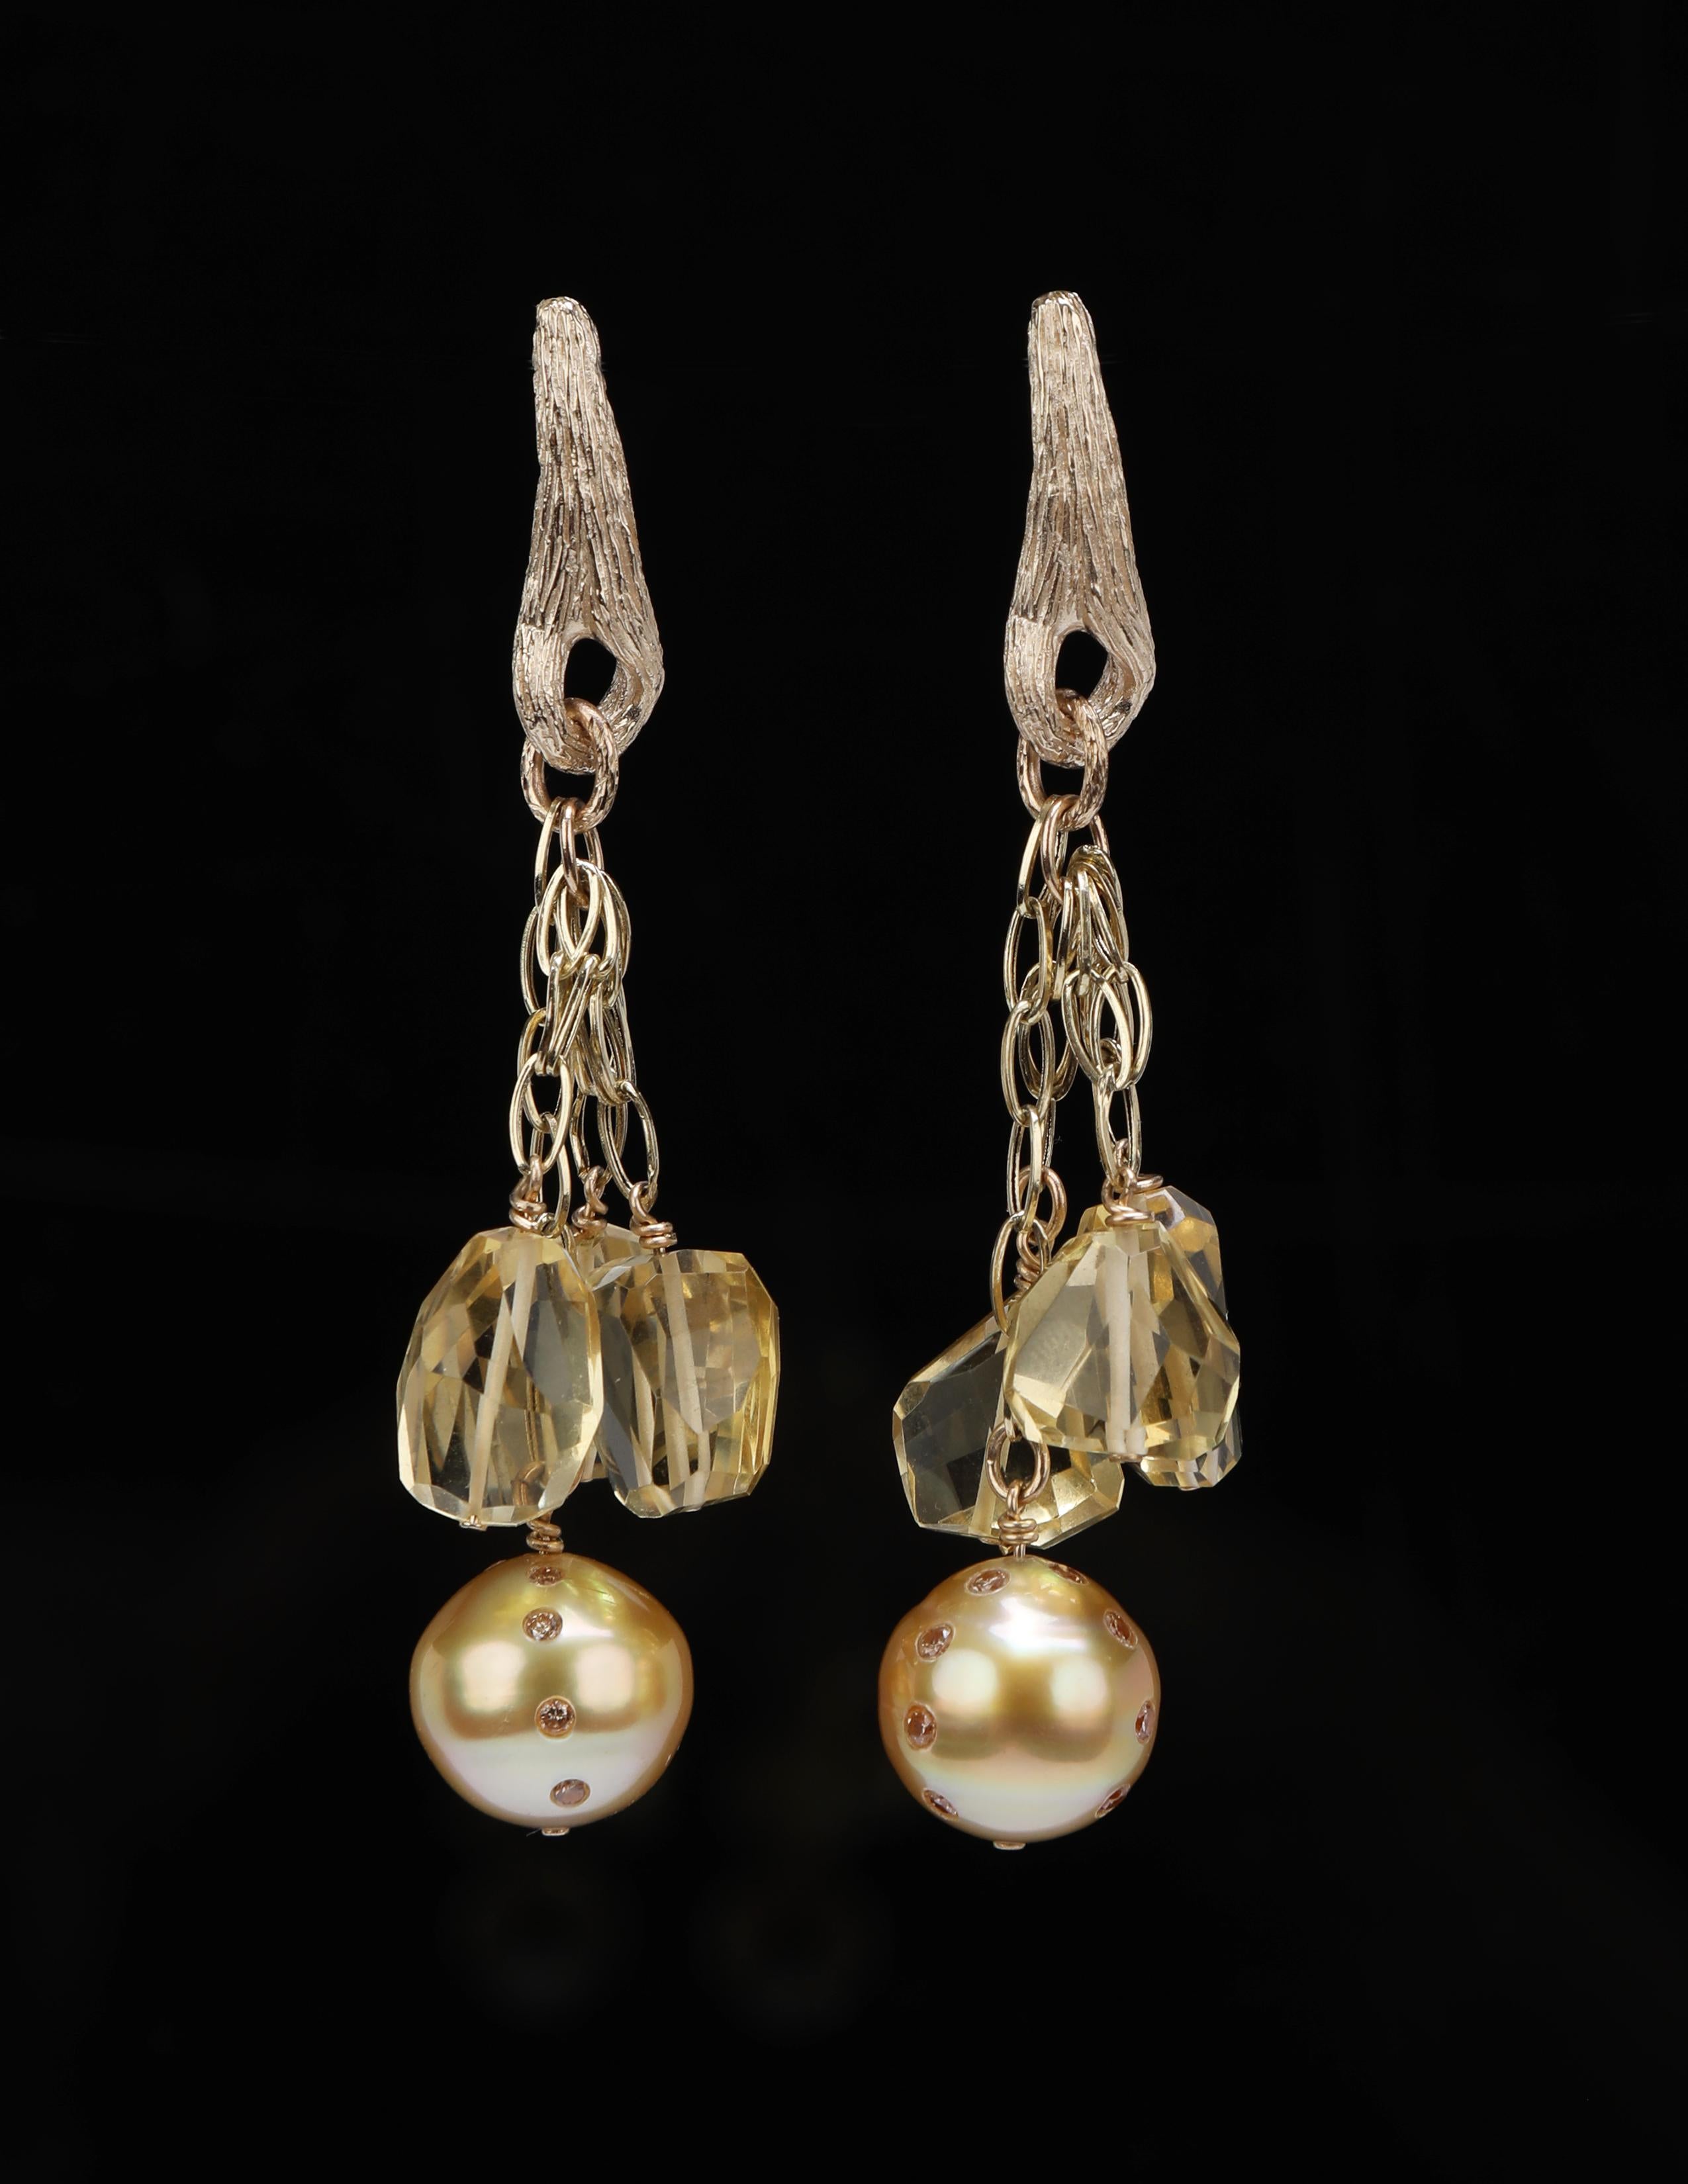 Four gold chains swing under gold vanilla beans.  One chain swings a golden south sea pearl (12mm), embellished by 12, round Champagne diamonds (approximately .64 cts. in weight).  The remaining 3 chains swing faceted, organic shapes of citrine. 